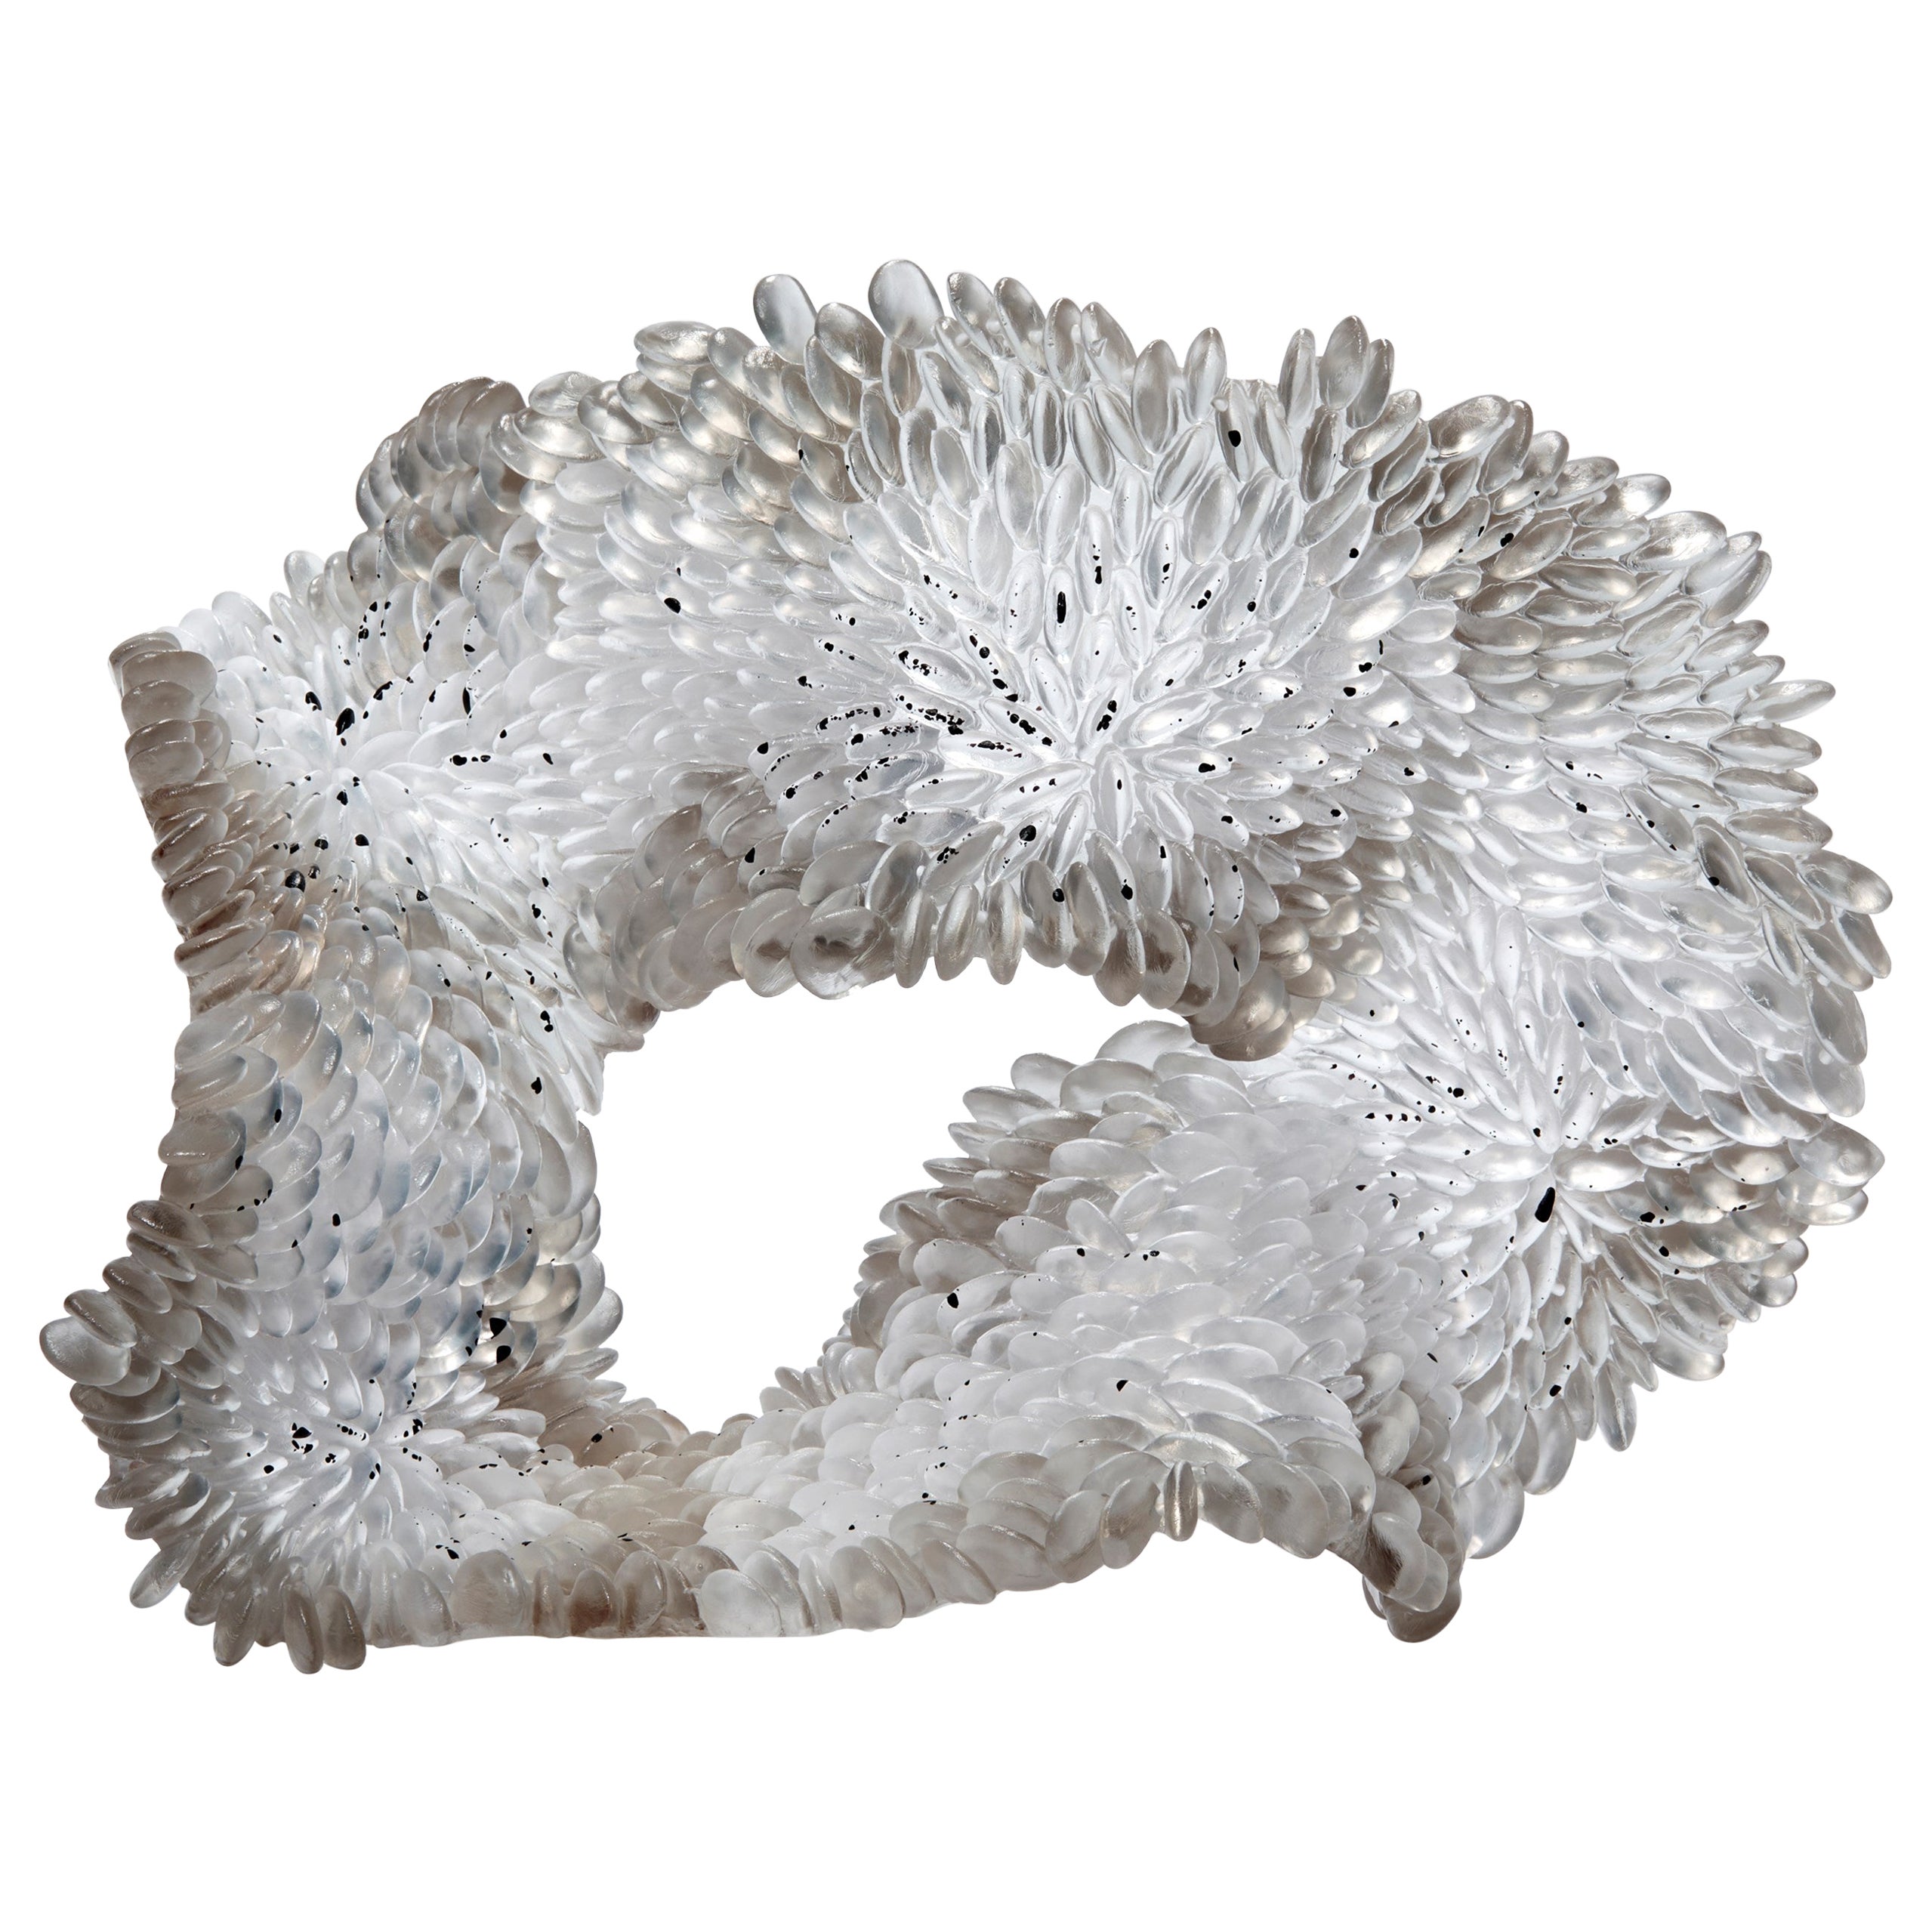 Speckled Grey, Standing Textured Cast Glass Sculpture by Nina Casson McGarva For Sale